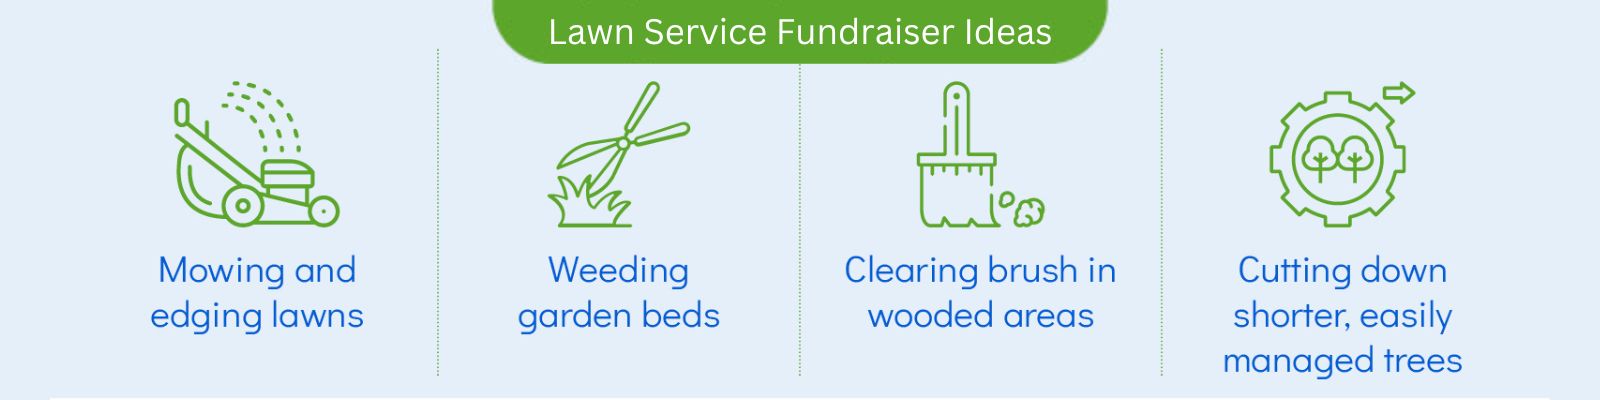 Lawn services that can be turned into fundraising ideas for kids.